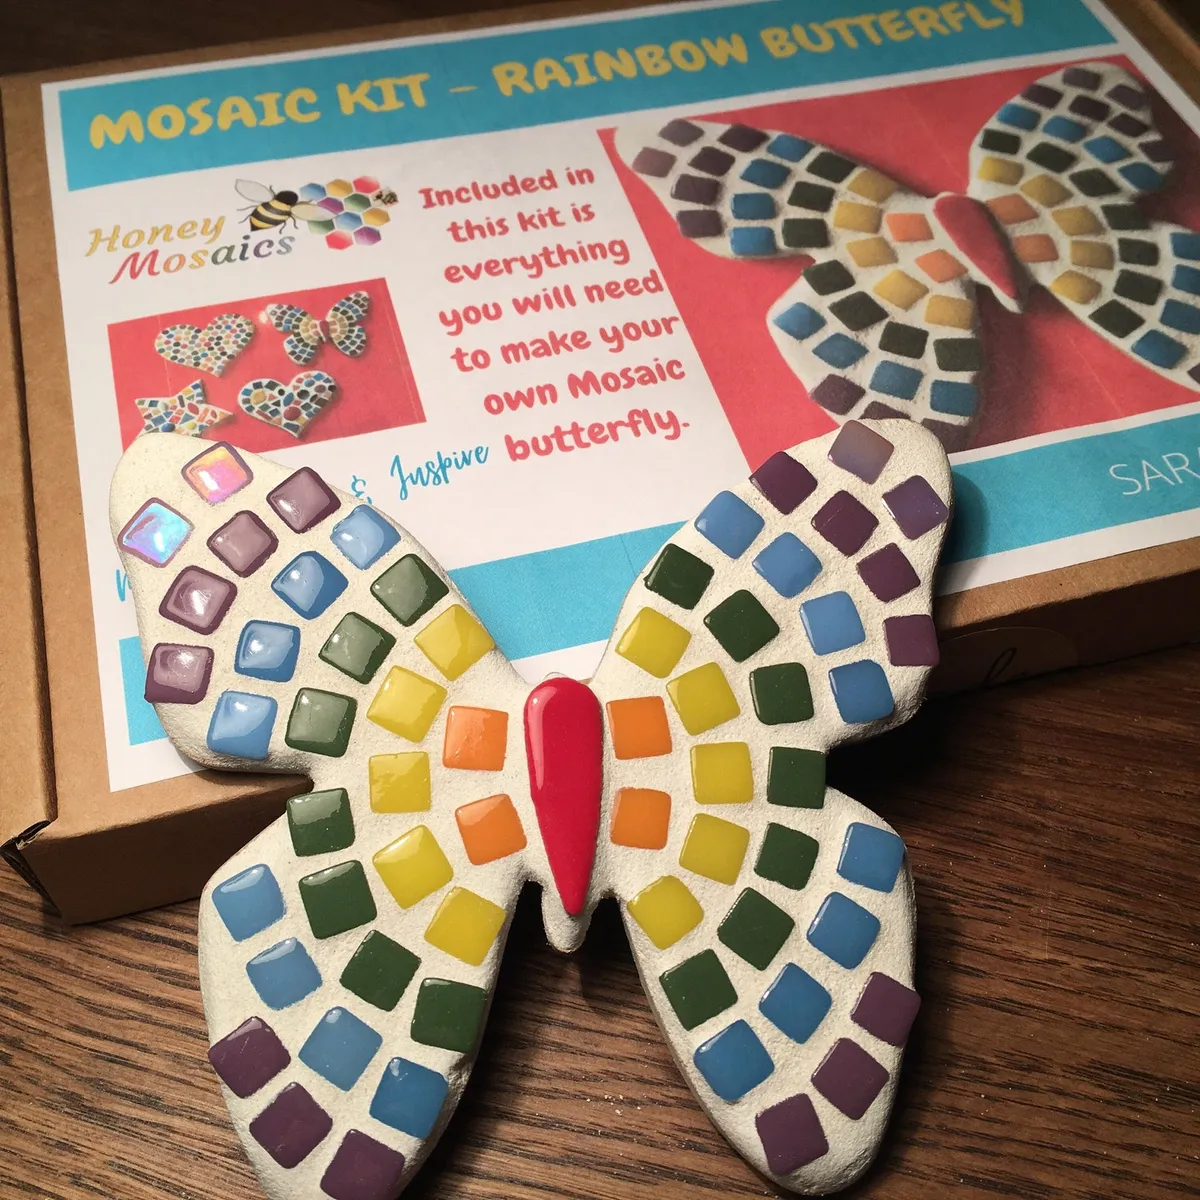 Mosaic Art Creative Kids kit excellent Mosaic by Number 3 designs craft kit